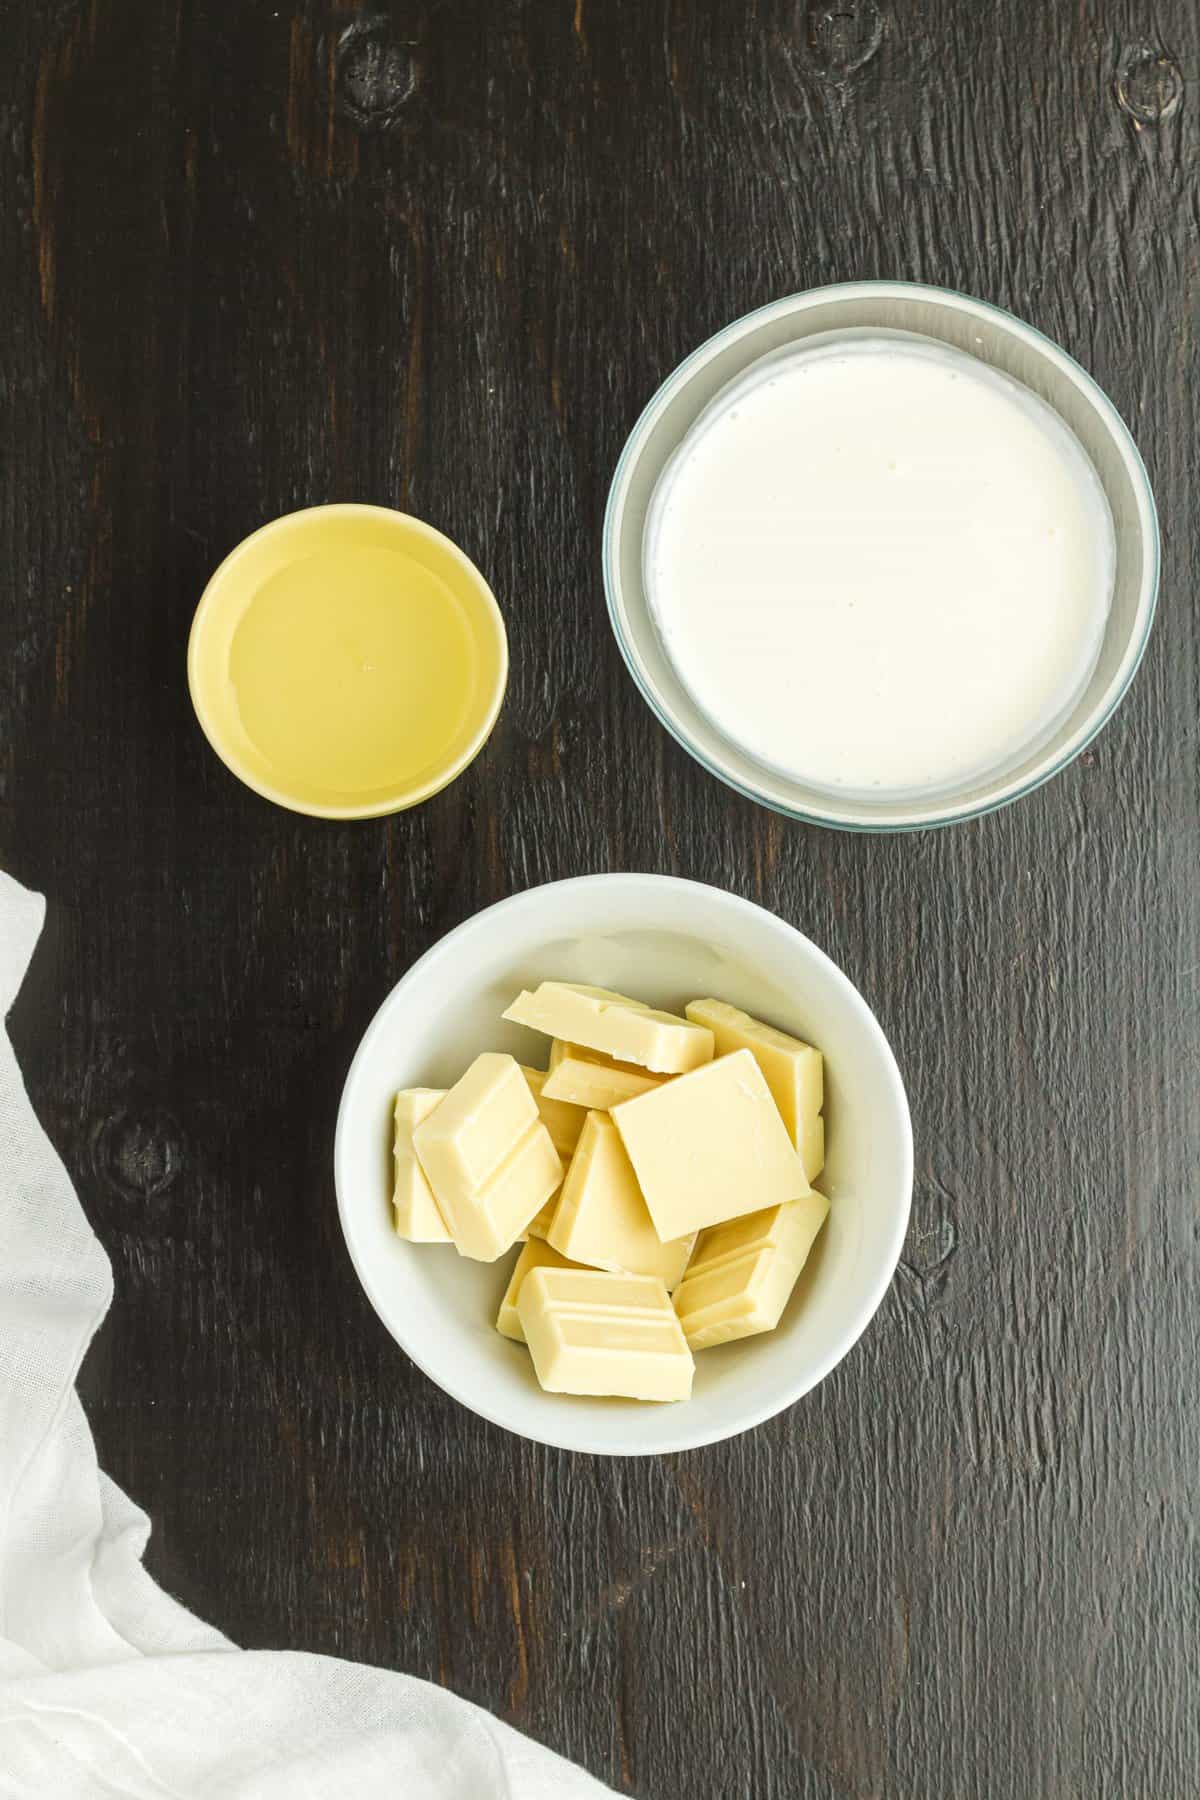 A bowl of white chocolate, cream, and ingredients to make the ganache filling.